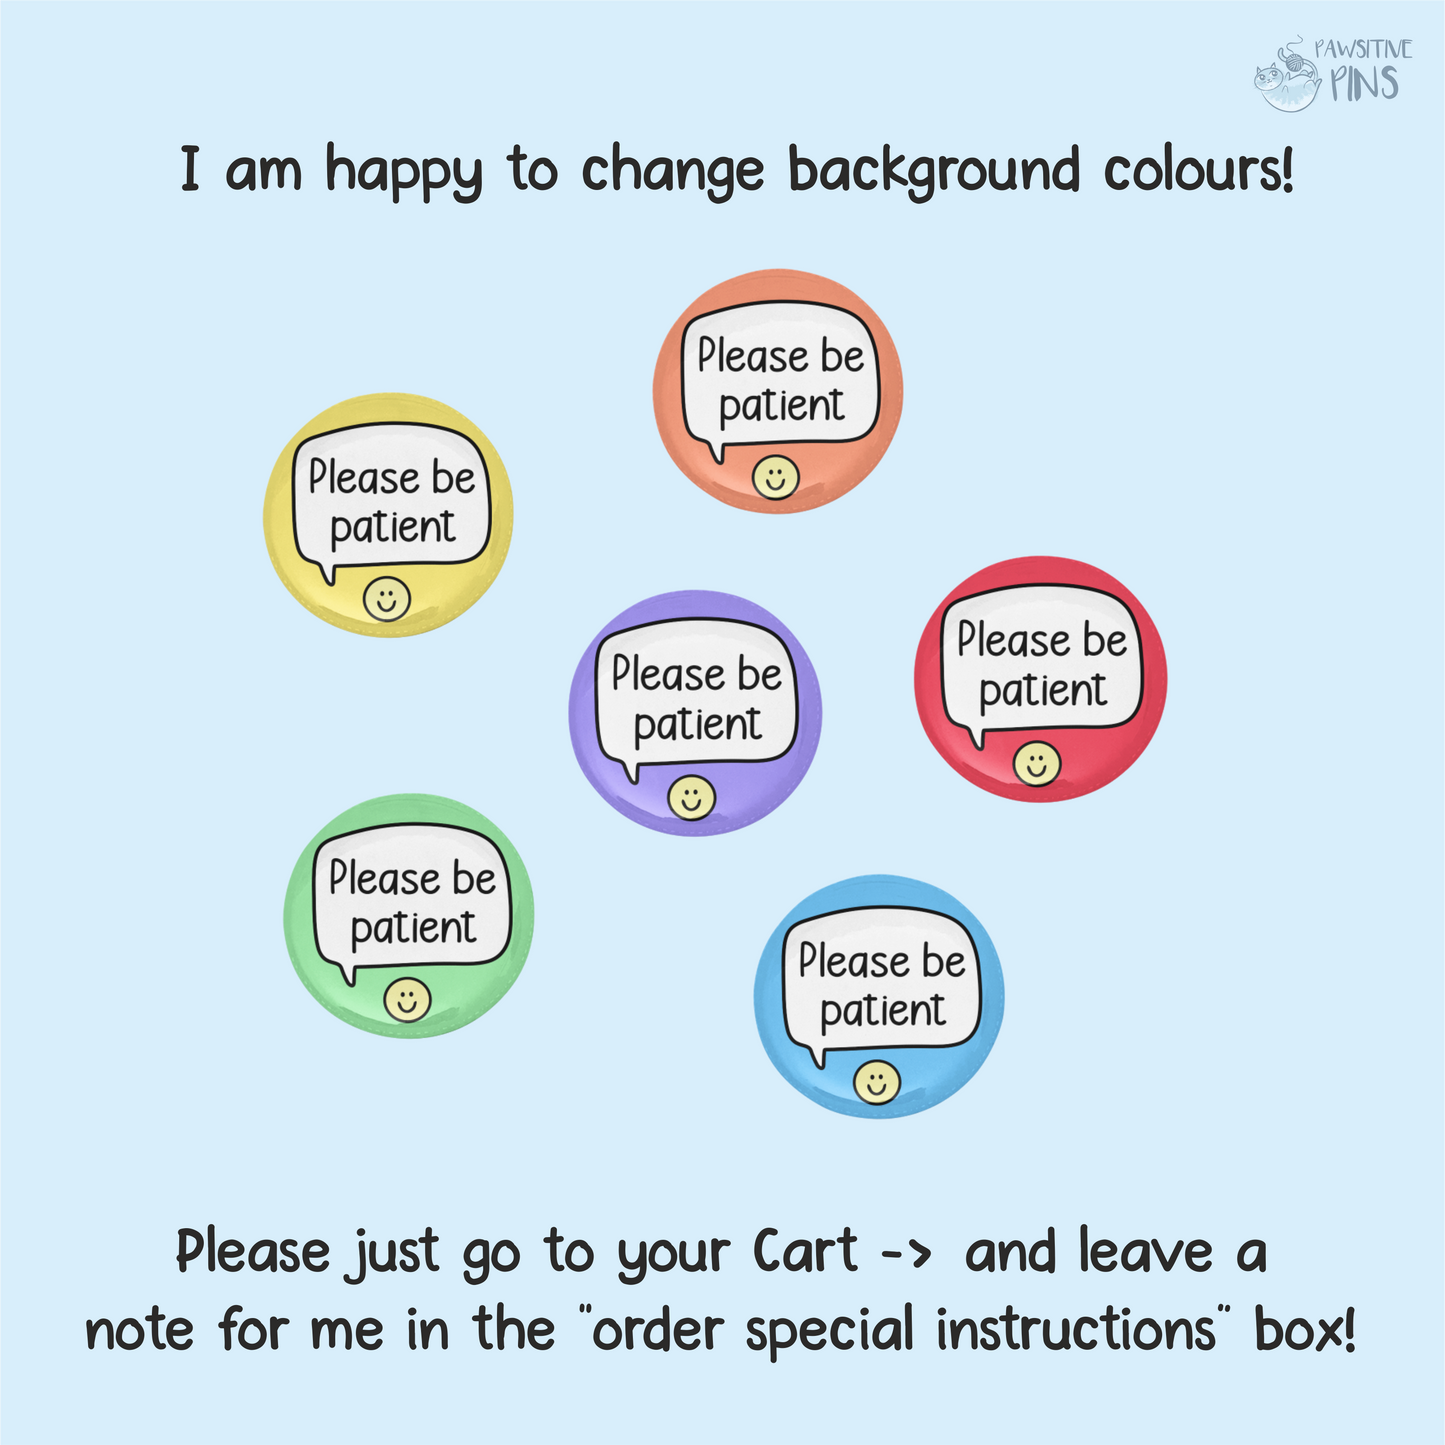 I Don't Like Change - Pin Badge | Routines